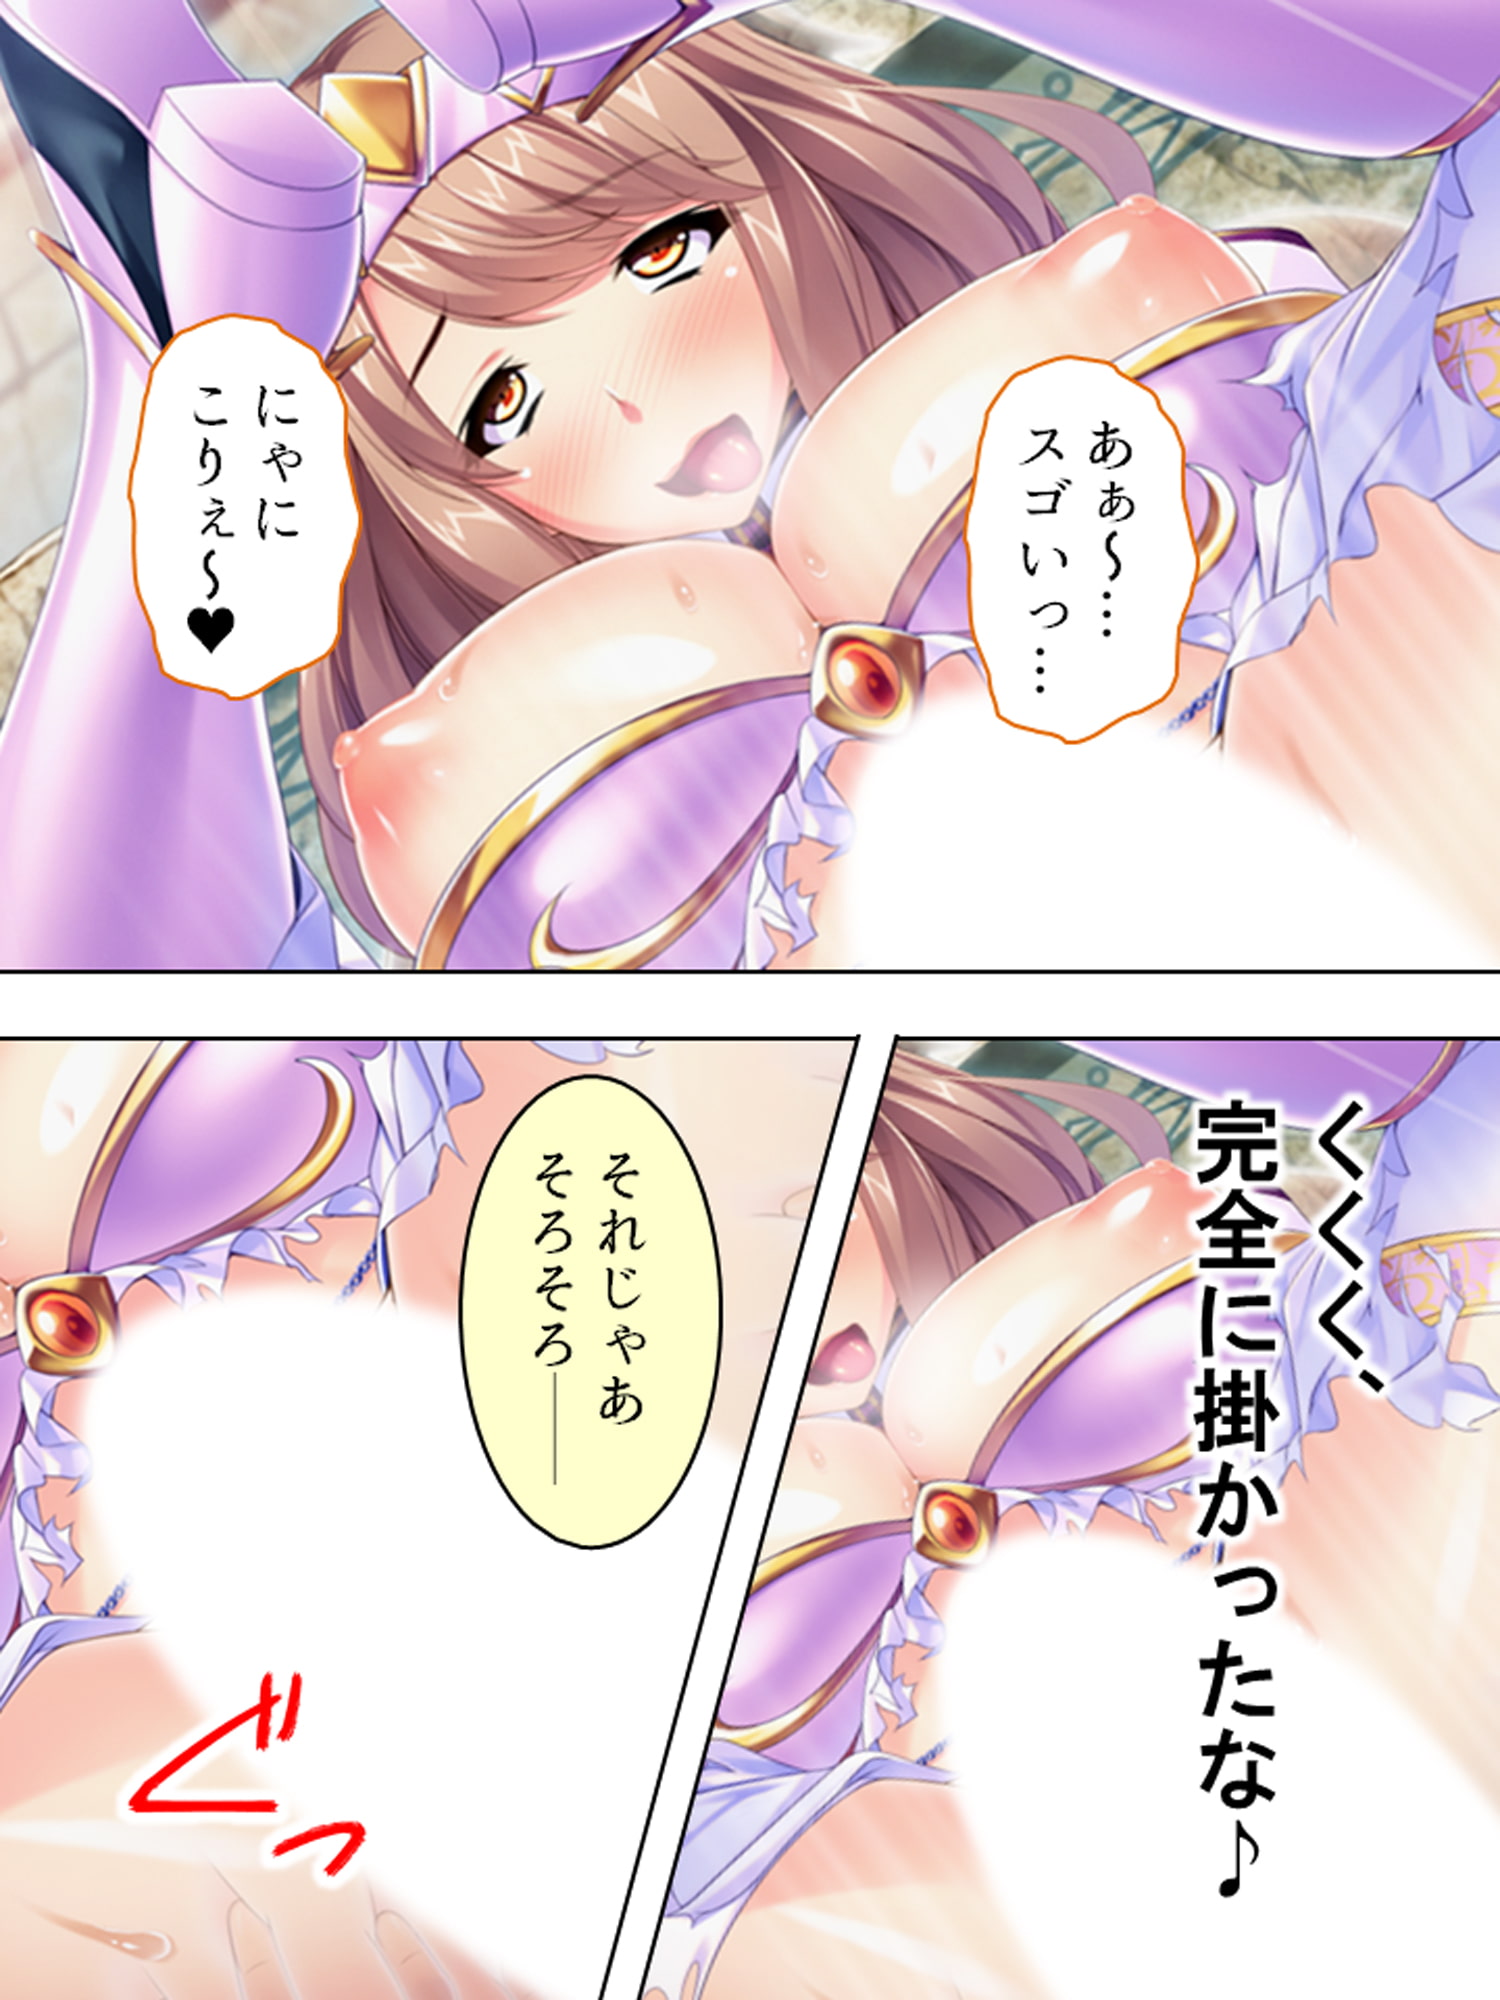 Using Isekai Cheats to Impregnate the Busty Female Knight! Part 2